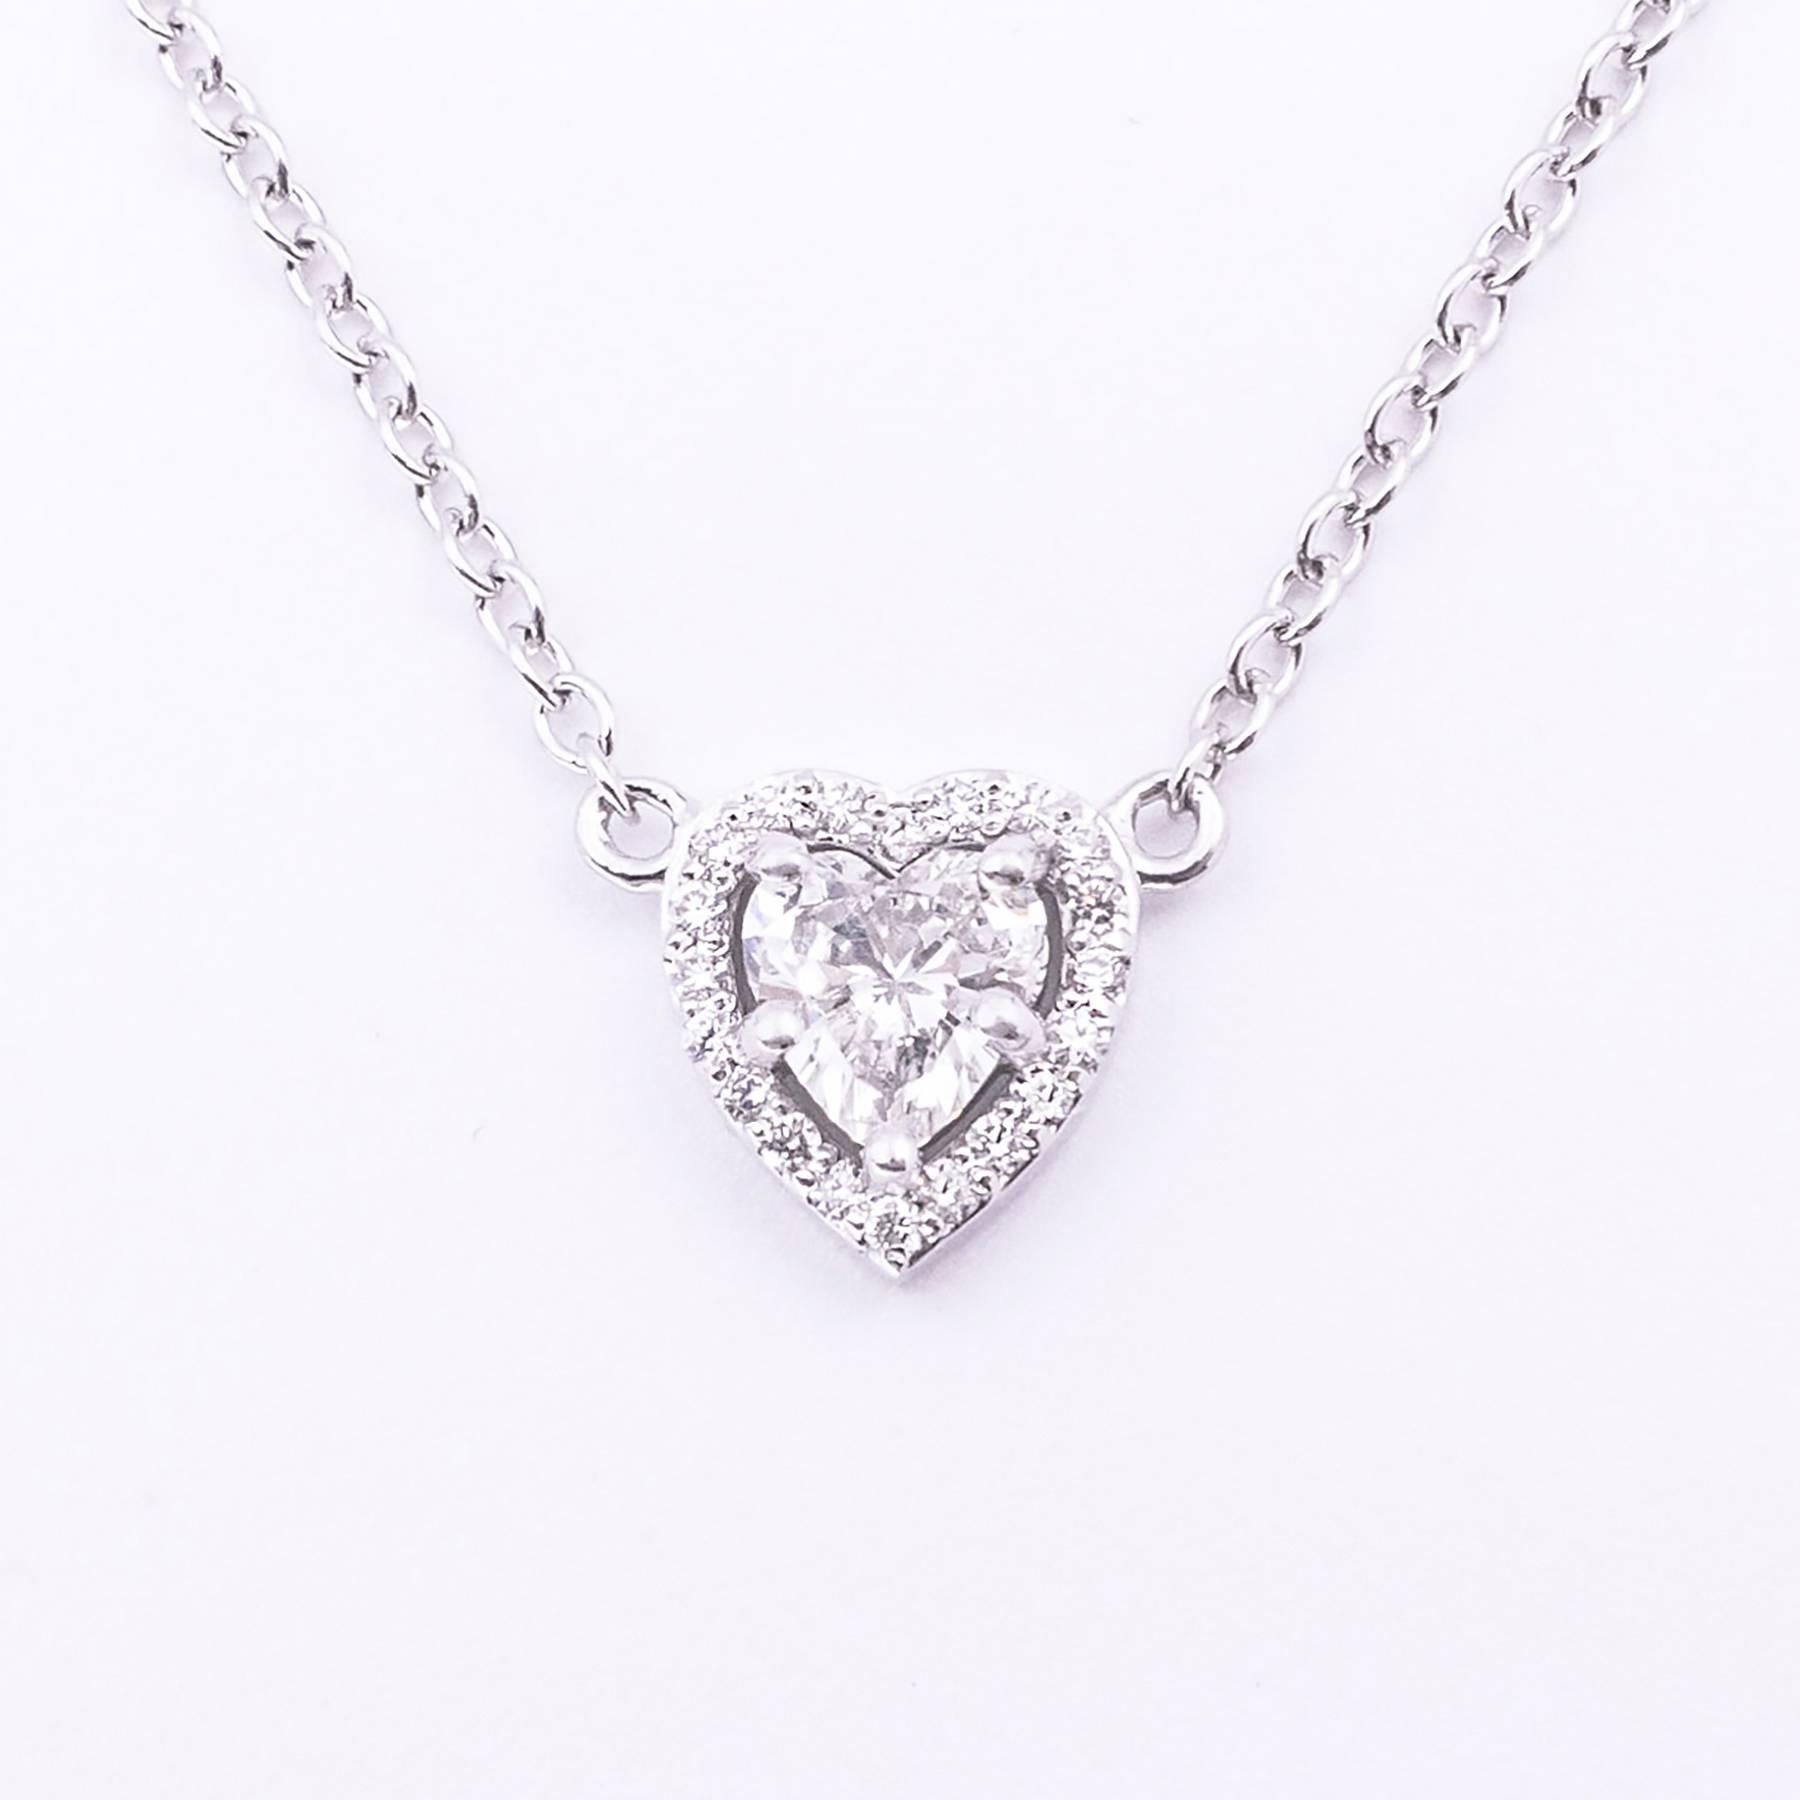 A half carat (.50) fancy cut Brilliant Heart Shaped Diamond is custom set in 18 karat white gold and surrounded with 20 Round Brilliant Cut Diamonds in this beautiful pendant totaling .67 carats.

The pendant hangs lavaliere style from an 18 karat,